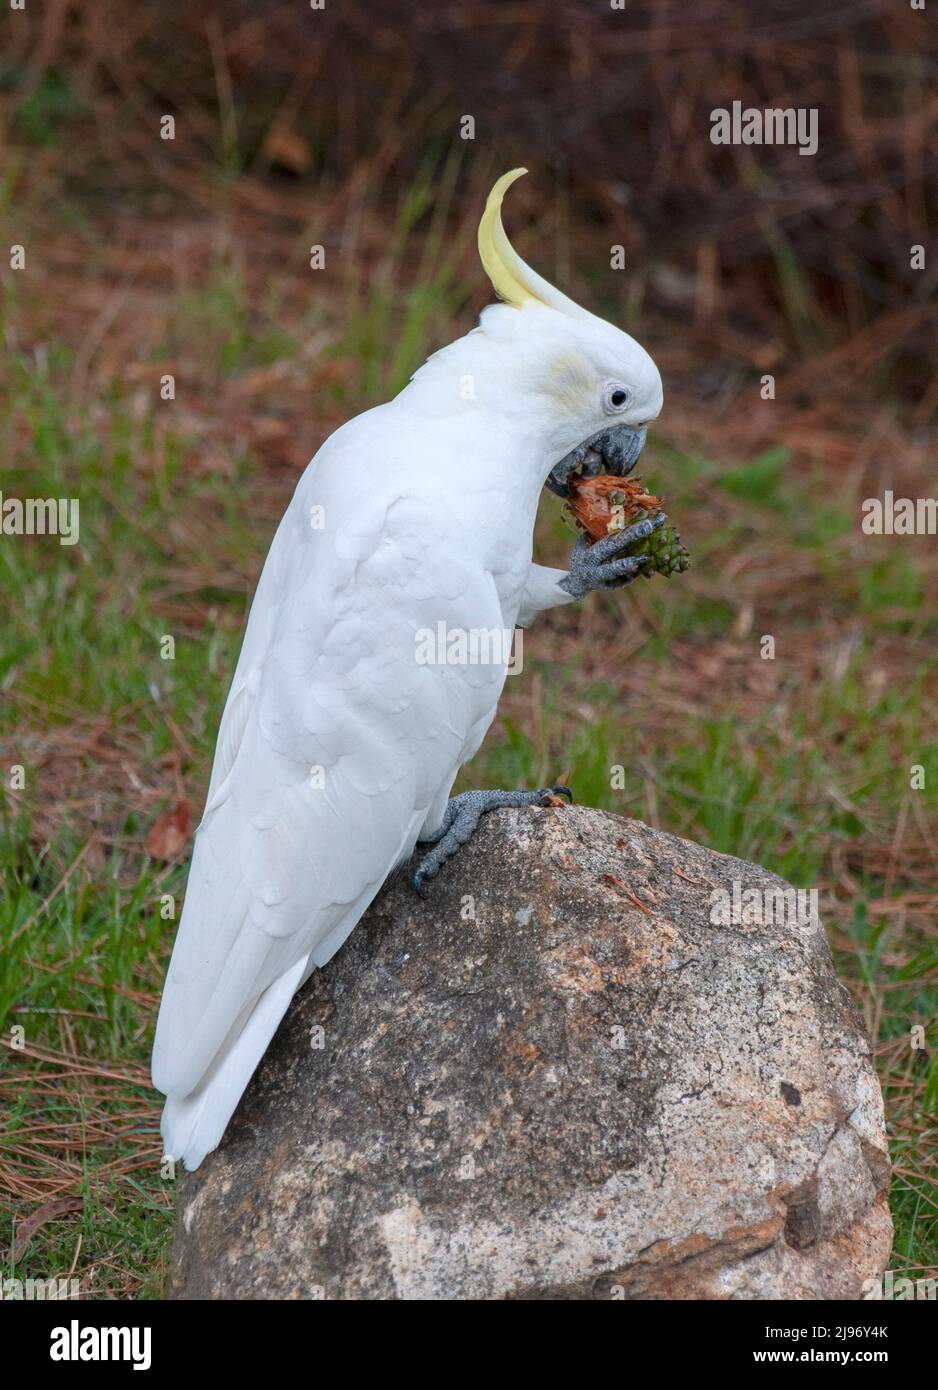 The yellow-crested cockatoo also known as the lesser sulphur-crested cockatoo, is a medium-sized cockatoo, seen eating a pine cone Stock Photo